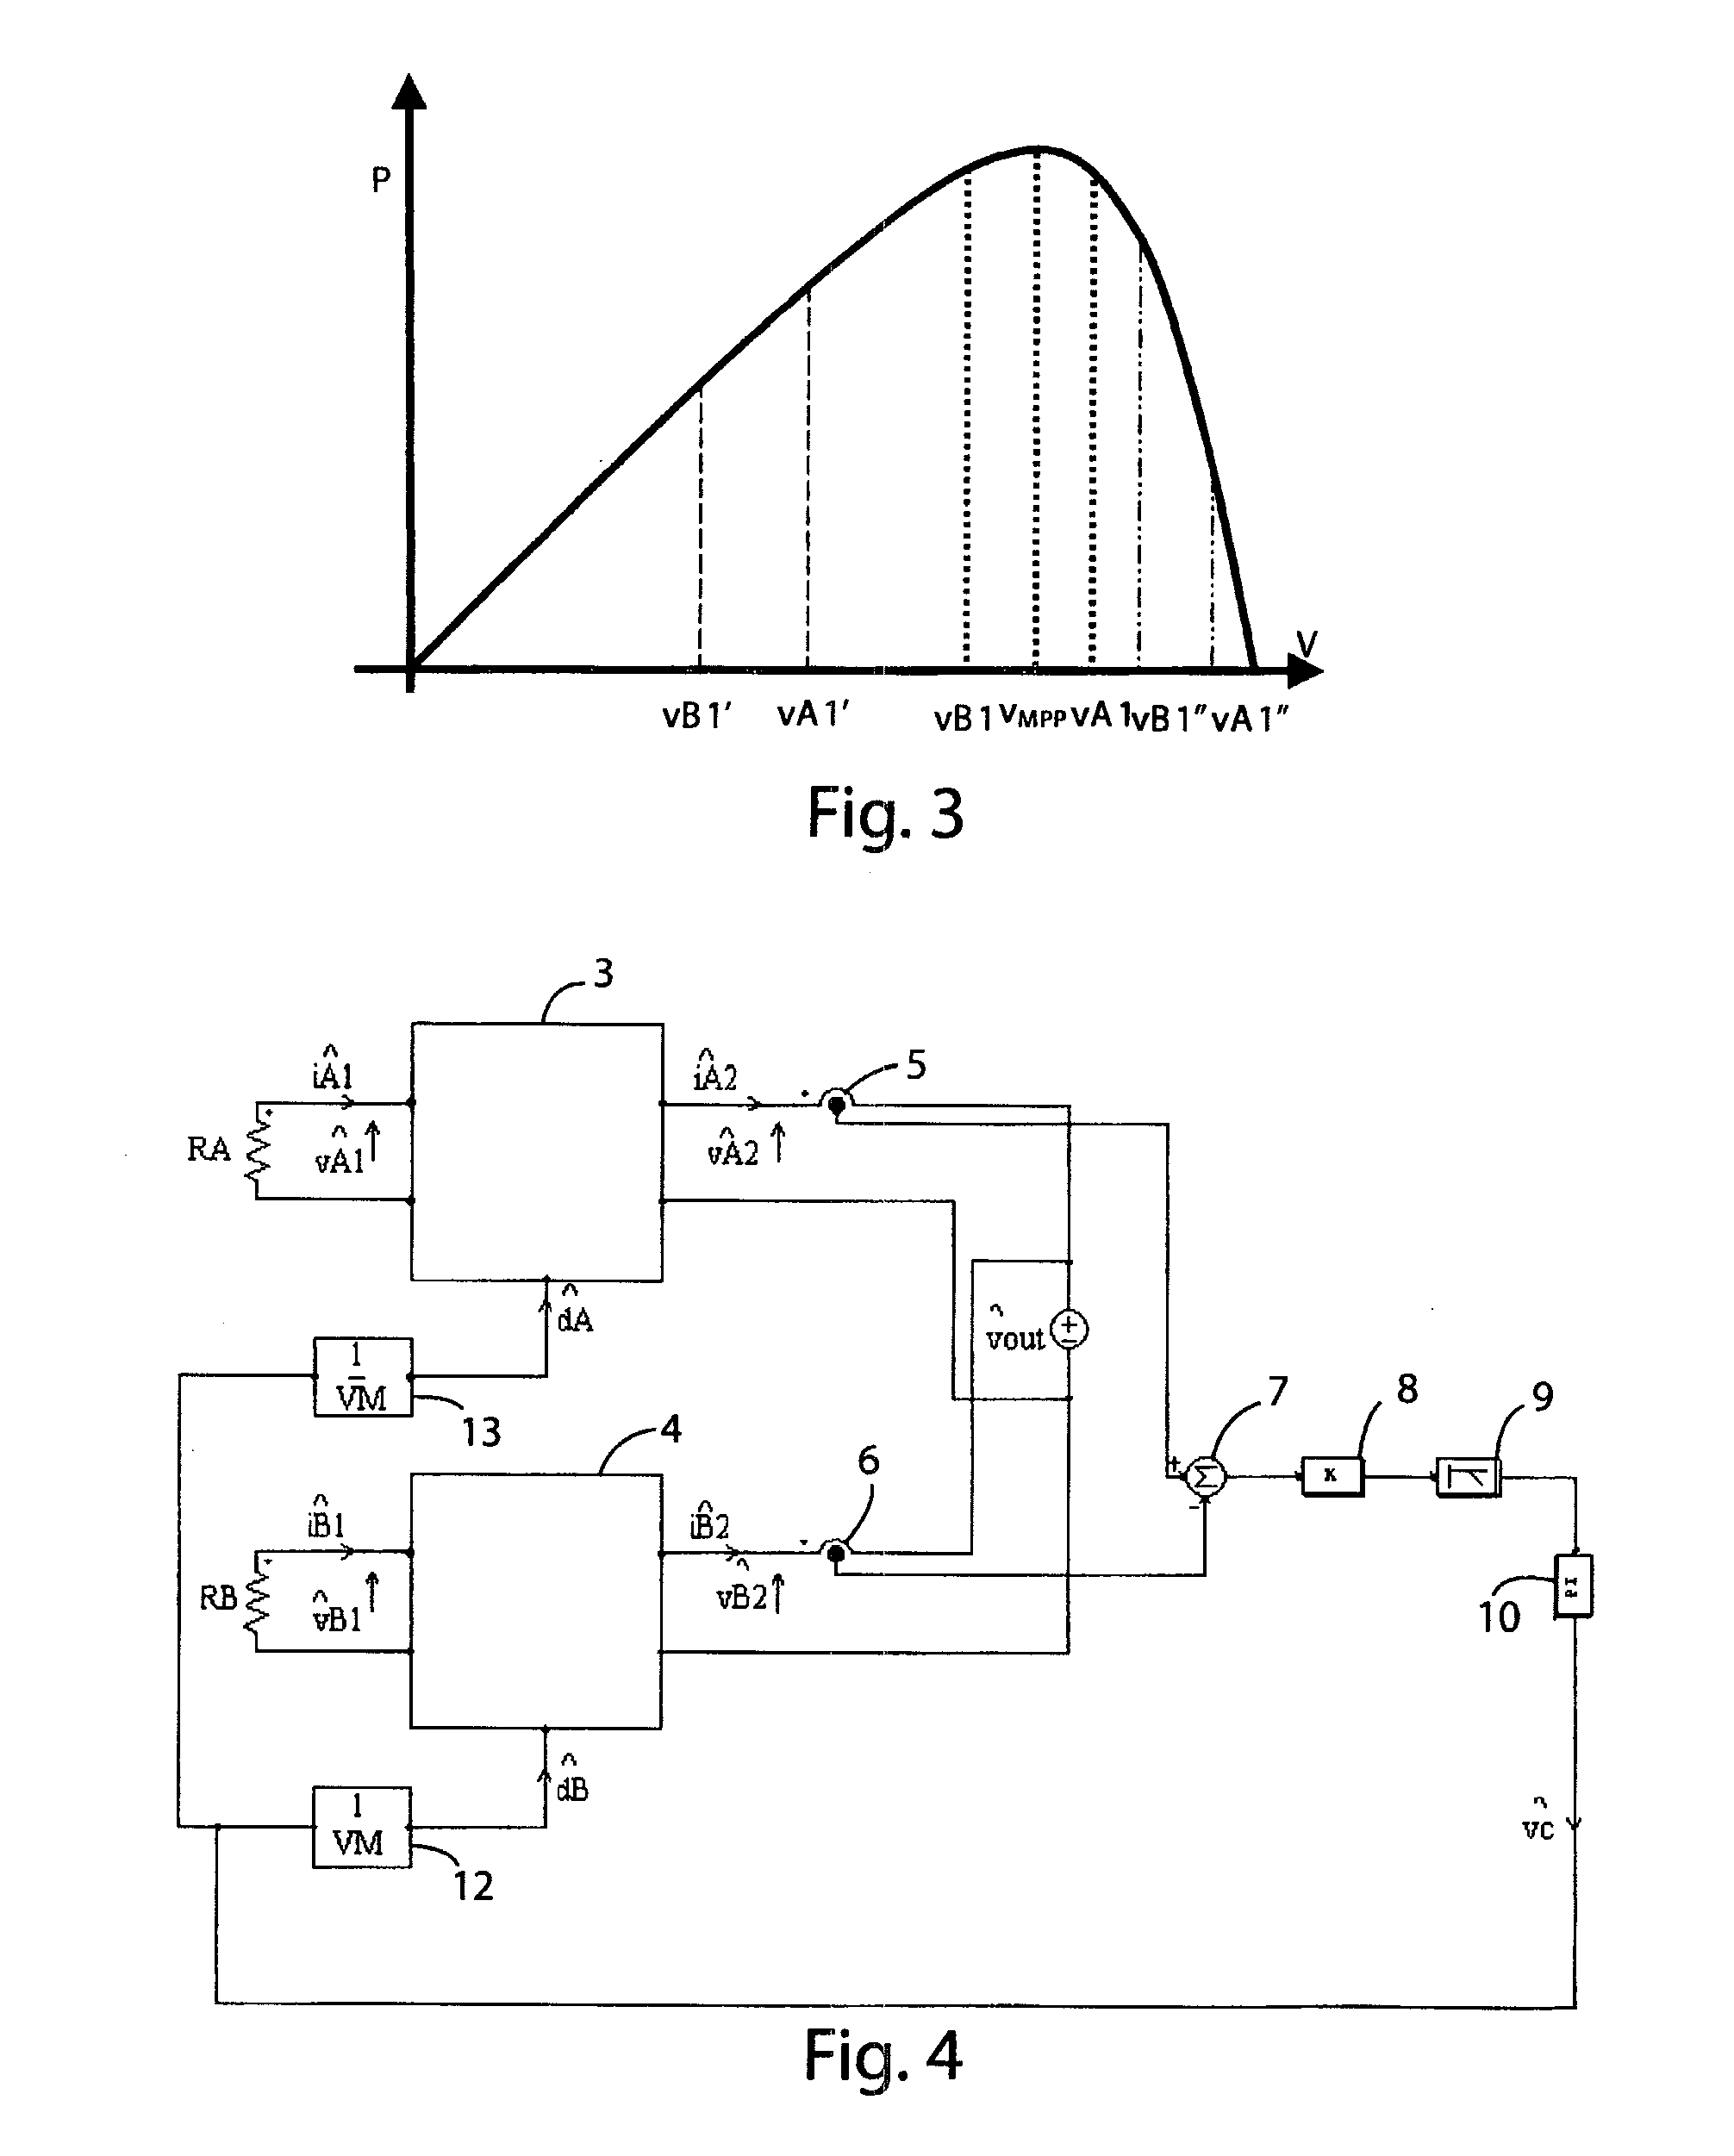 Controller apparatus with maximum power point tracking for controlling an electric power generation system based on photovoltaic sources, controlling method and related electric power generation system